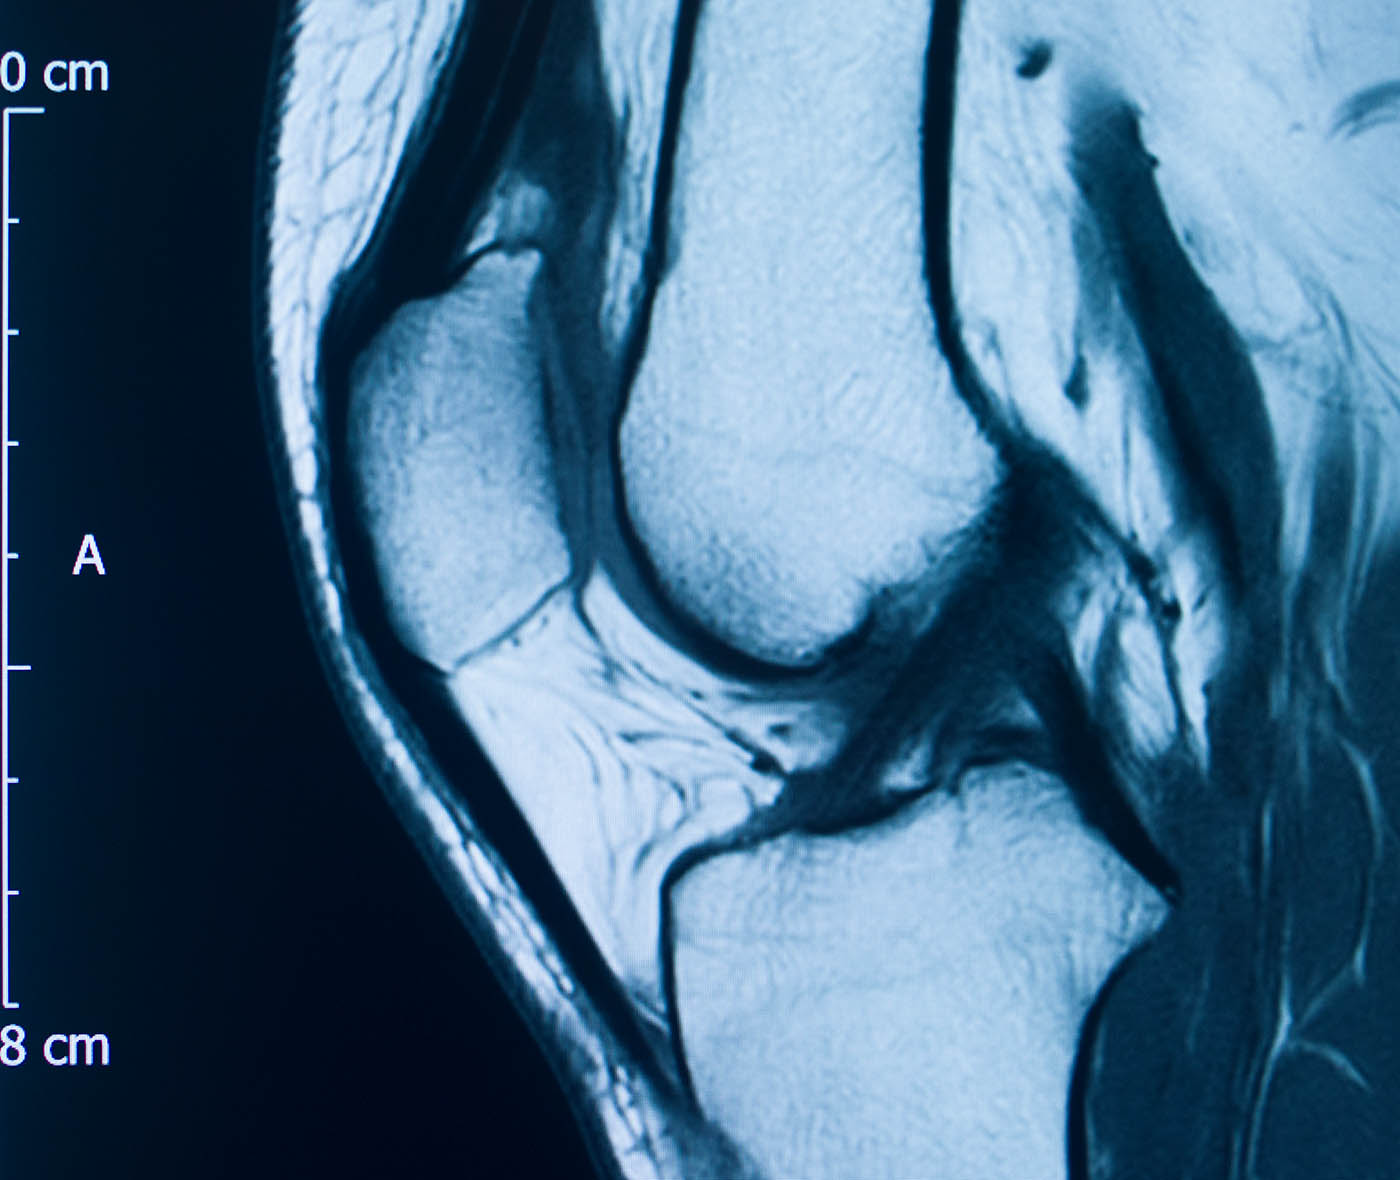 MRI image of a sports injury to someone's knee